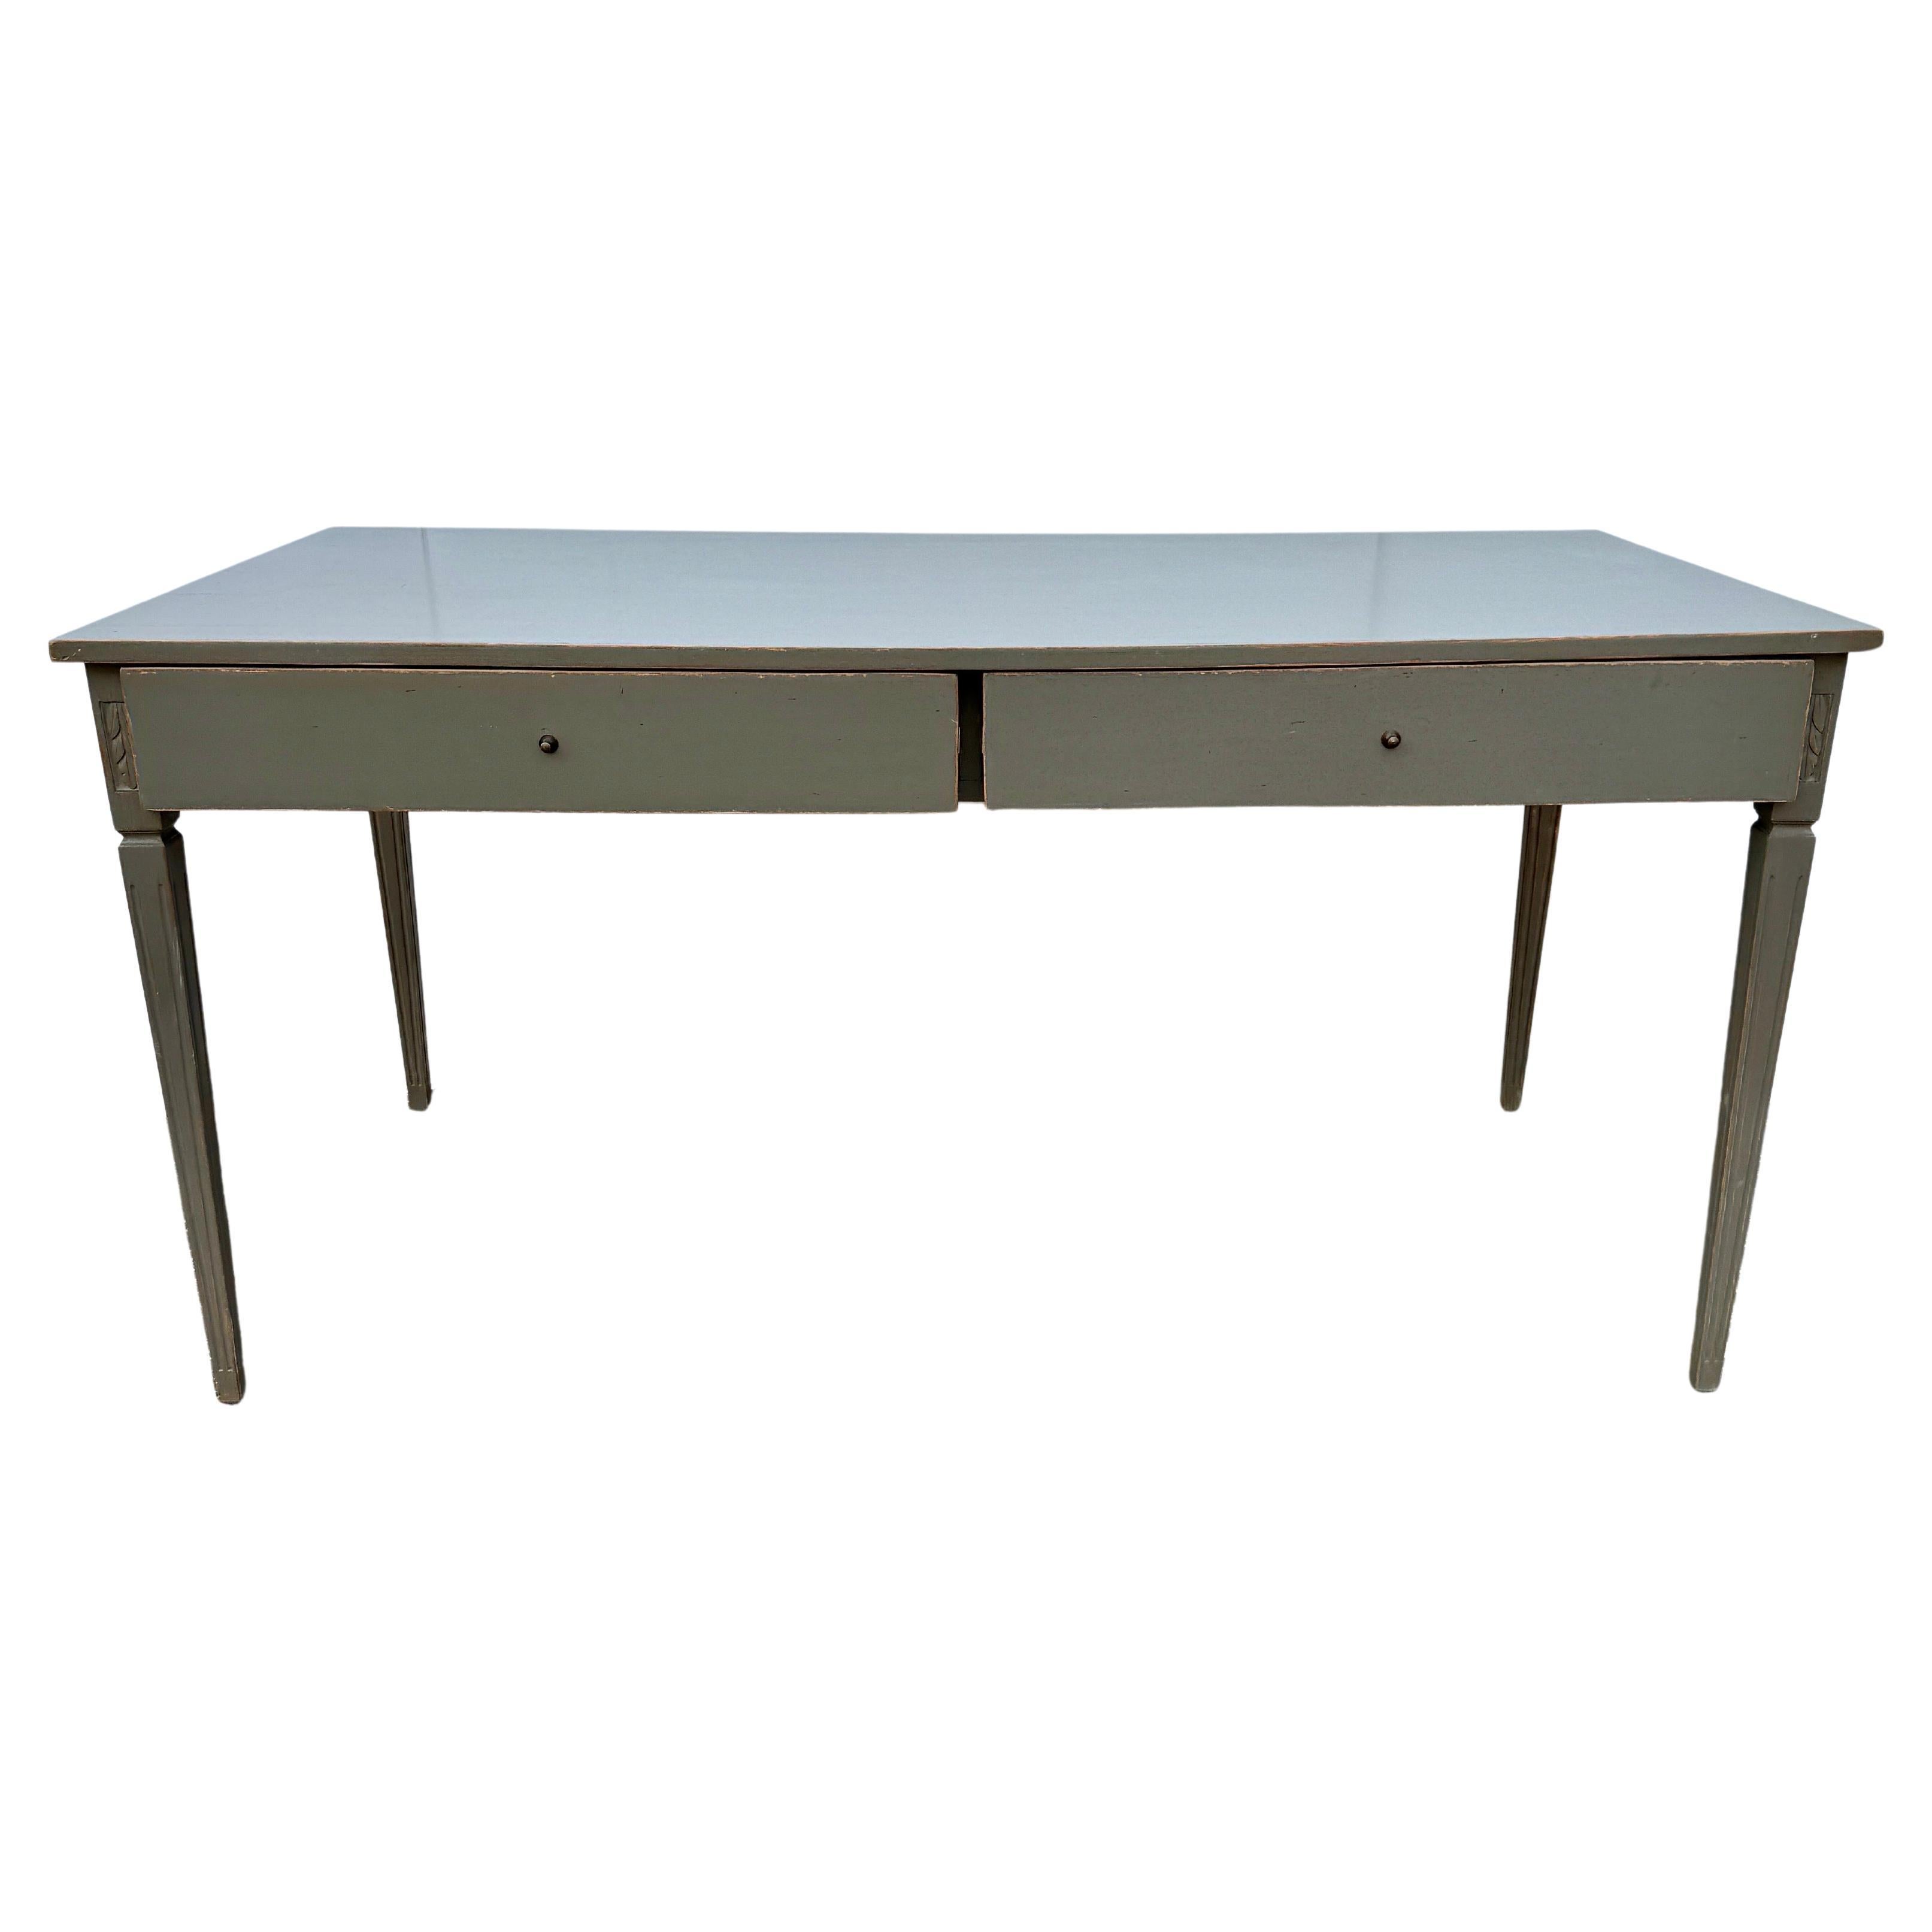 Large Painted Grey Green Gustavian Style Two Drawer Writing Table Desk, Sweden

Classic and Scandinavian style writing desk. Hand-carved and hand-painted. 
Drawer knobs are patinated bronze. Wonderful piece for a home office, library or sitting